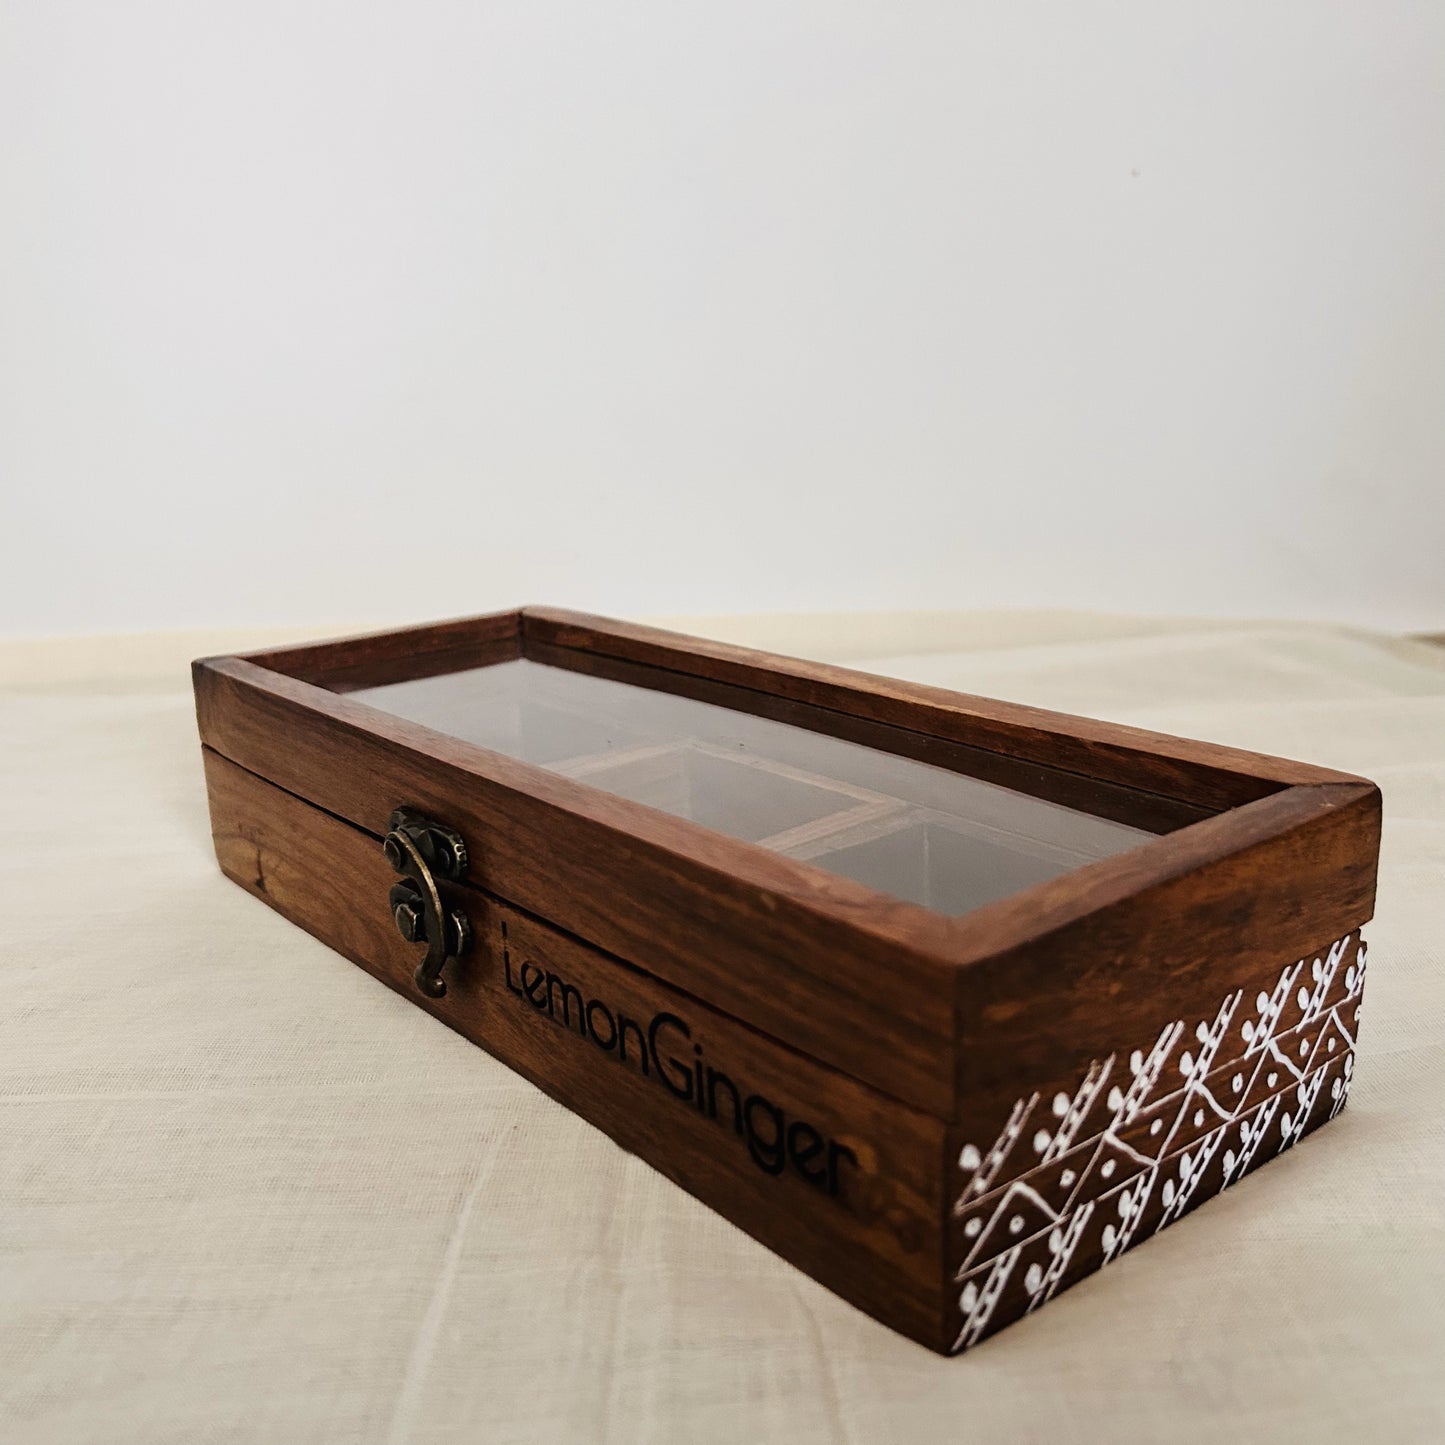 Rectangular Wooden Masala Box, Multi utility wooden box for storage, Dry fruit box, Spice box. Beautiful long rectangular box that has 3 square compartments or wooden square boxes that can be used to store masala, spices, dry fruits, or jewelry, and trinkets. Perfect gift for kids, wife, husband, friends, and all those who love to host, organize and decorate their house. Perfectly designed to add beauty and elegance to your coffee table, teapoy, kitchen, and dining rooms. 